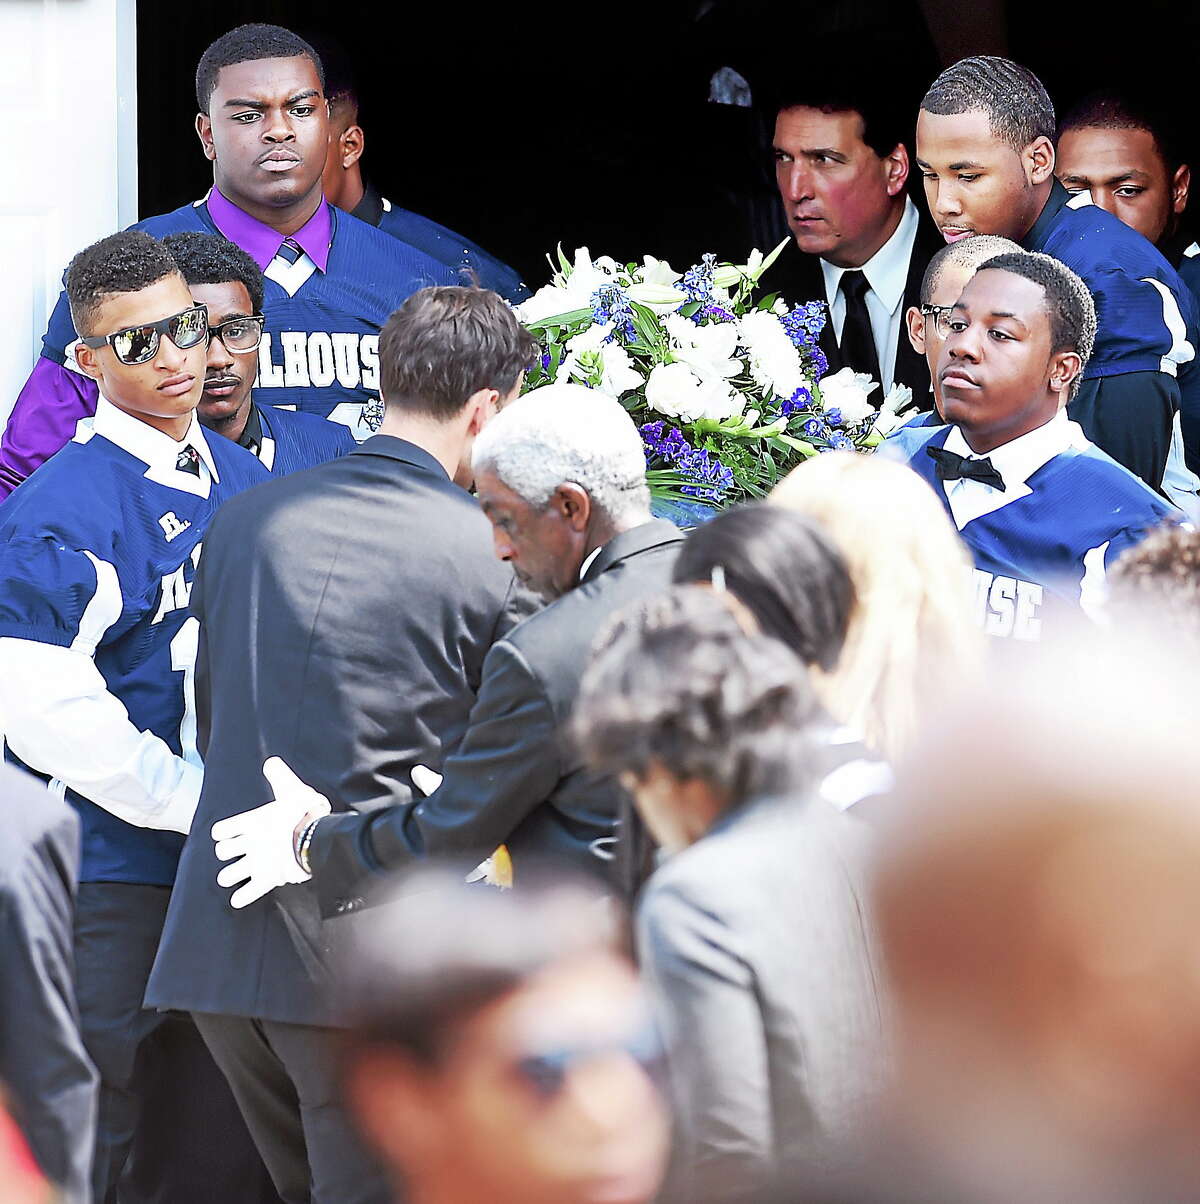 Members of the Hillhouse High School football team carry the casket of Jacob Craggett out of the Christian Tabernacle Baptist Church in Hamden on August 16, 2014.